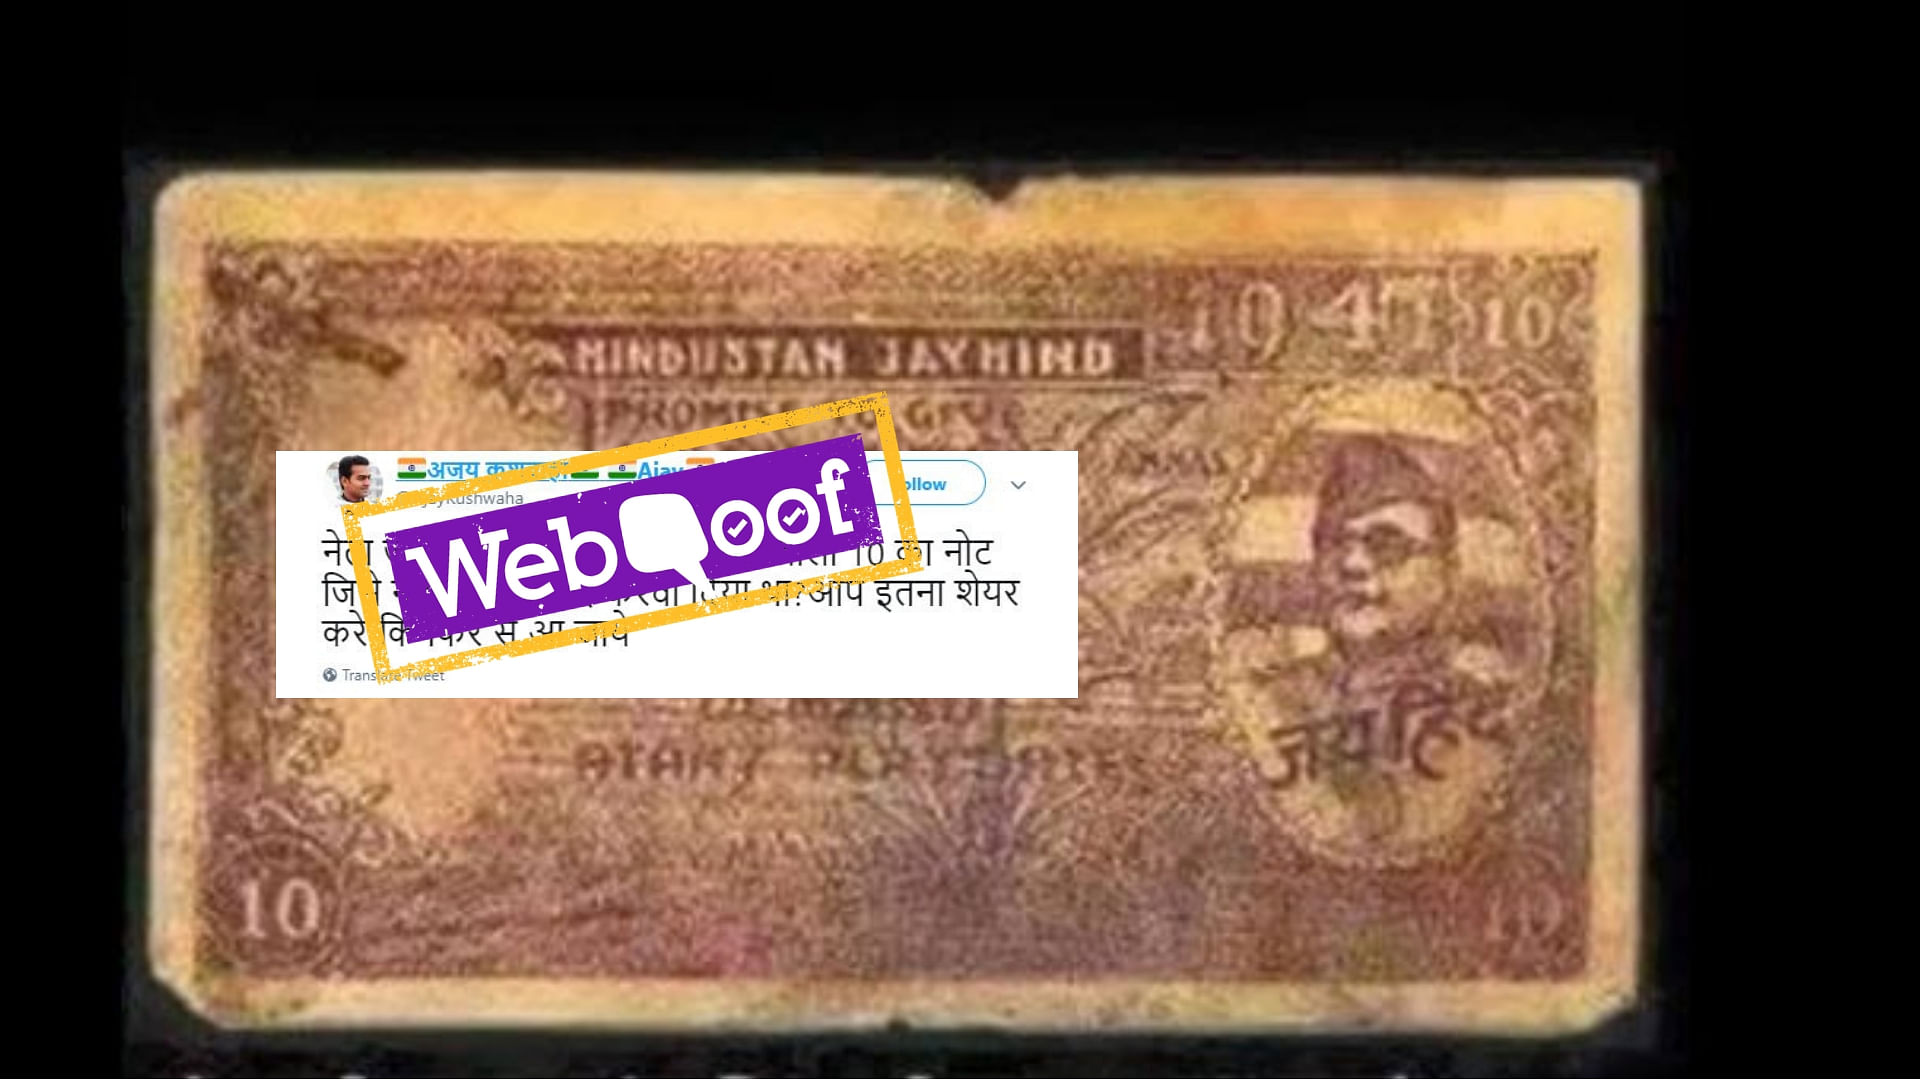  Several posts claim that the image is of a rupee note featuring Netaji and was scrapped by Jawaharlal Nehru.